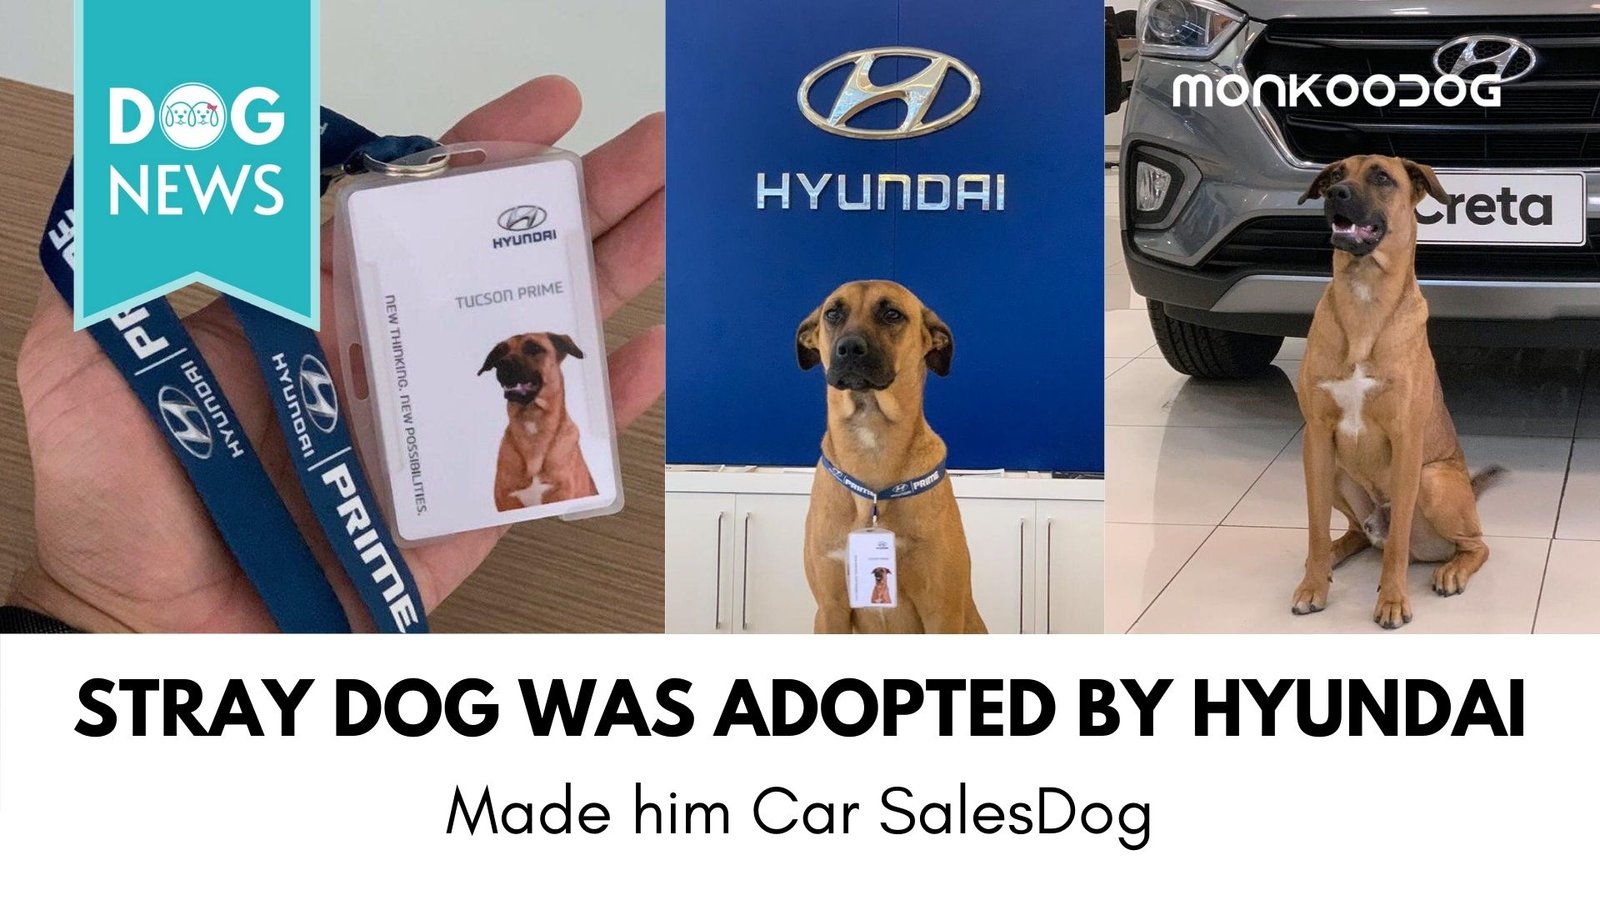 Stray Dog was adopted by Hyundai Showroom in Brazil. Made him Car Sales Dog